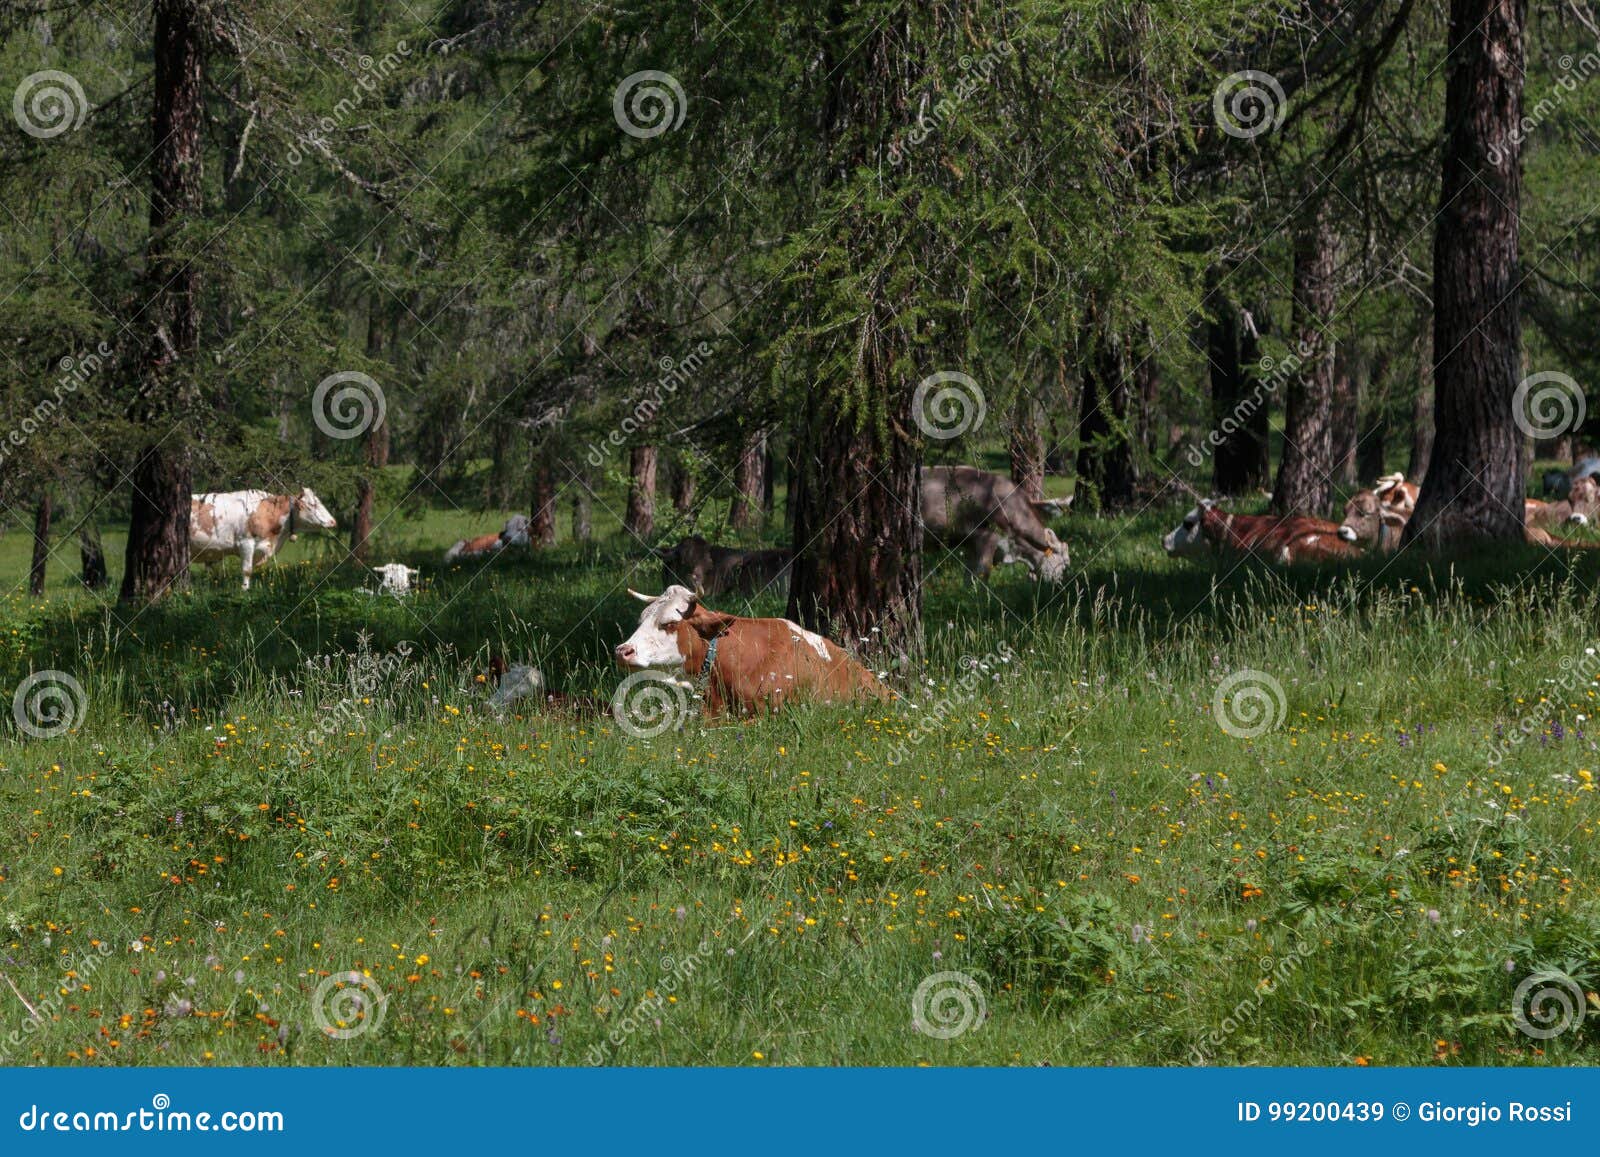 brown and white spotted cow pasturing in grazing lands: italian